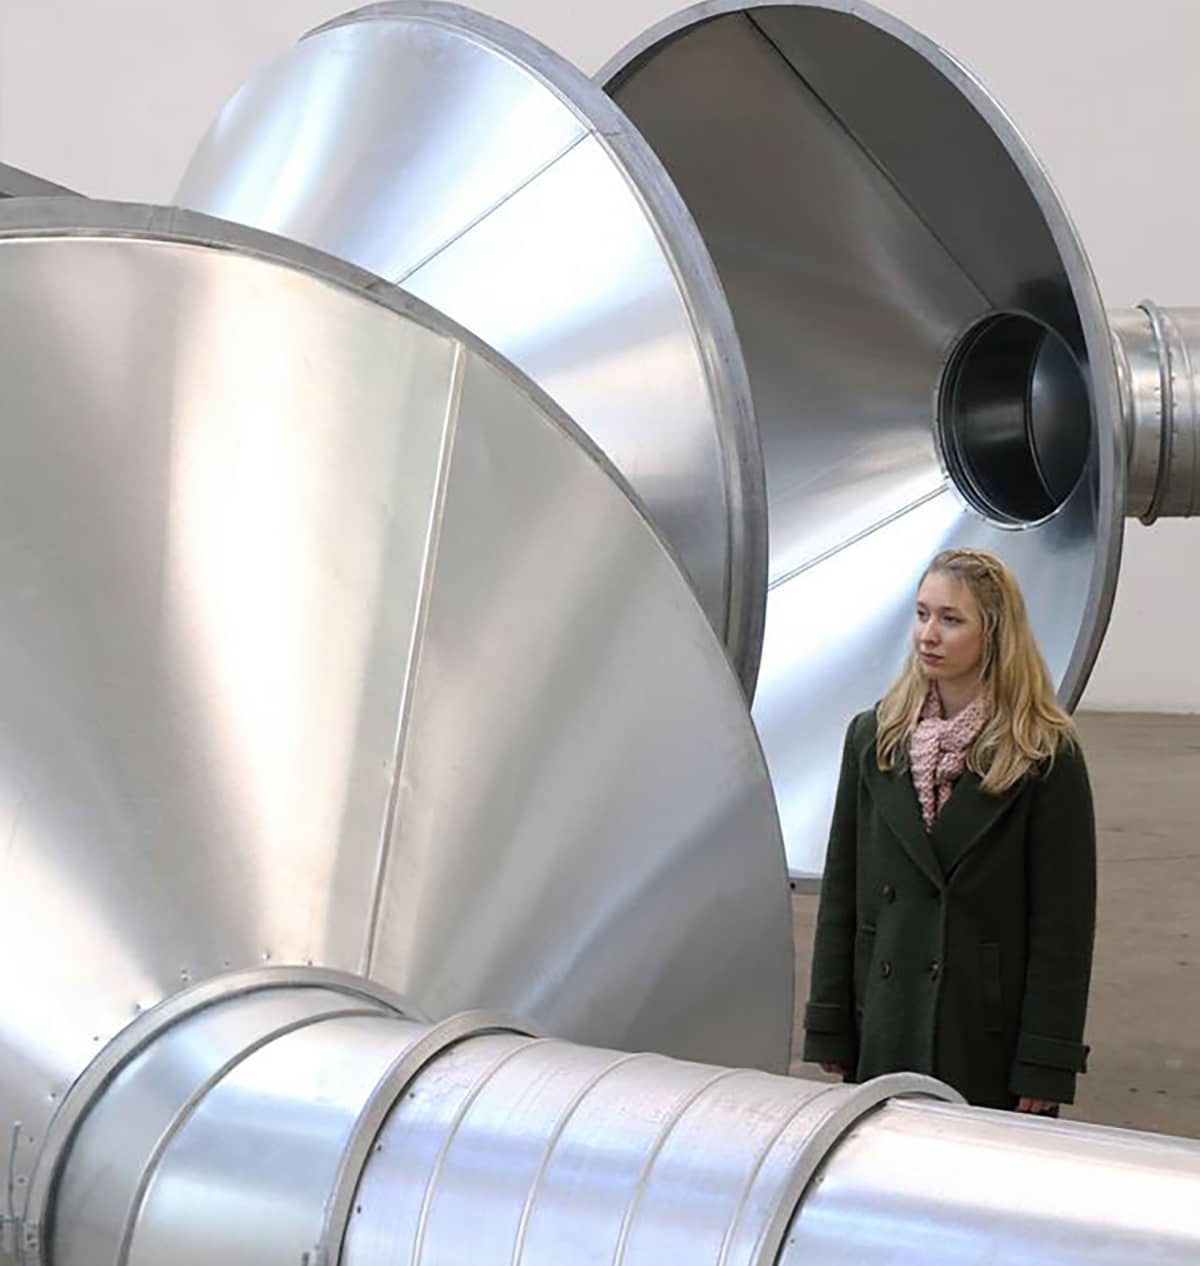 Woman stands beside one of the speaking tubes, listening.